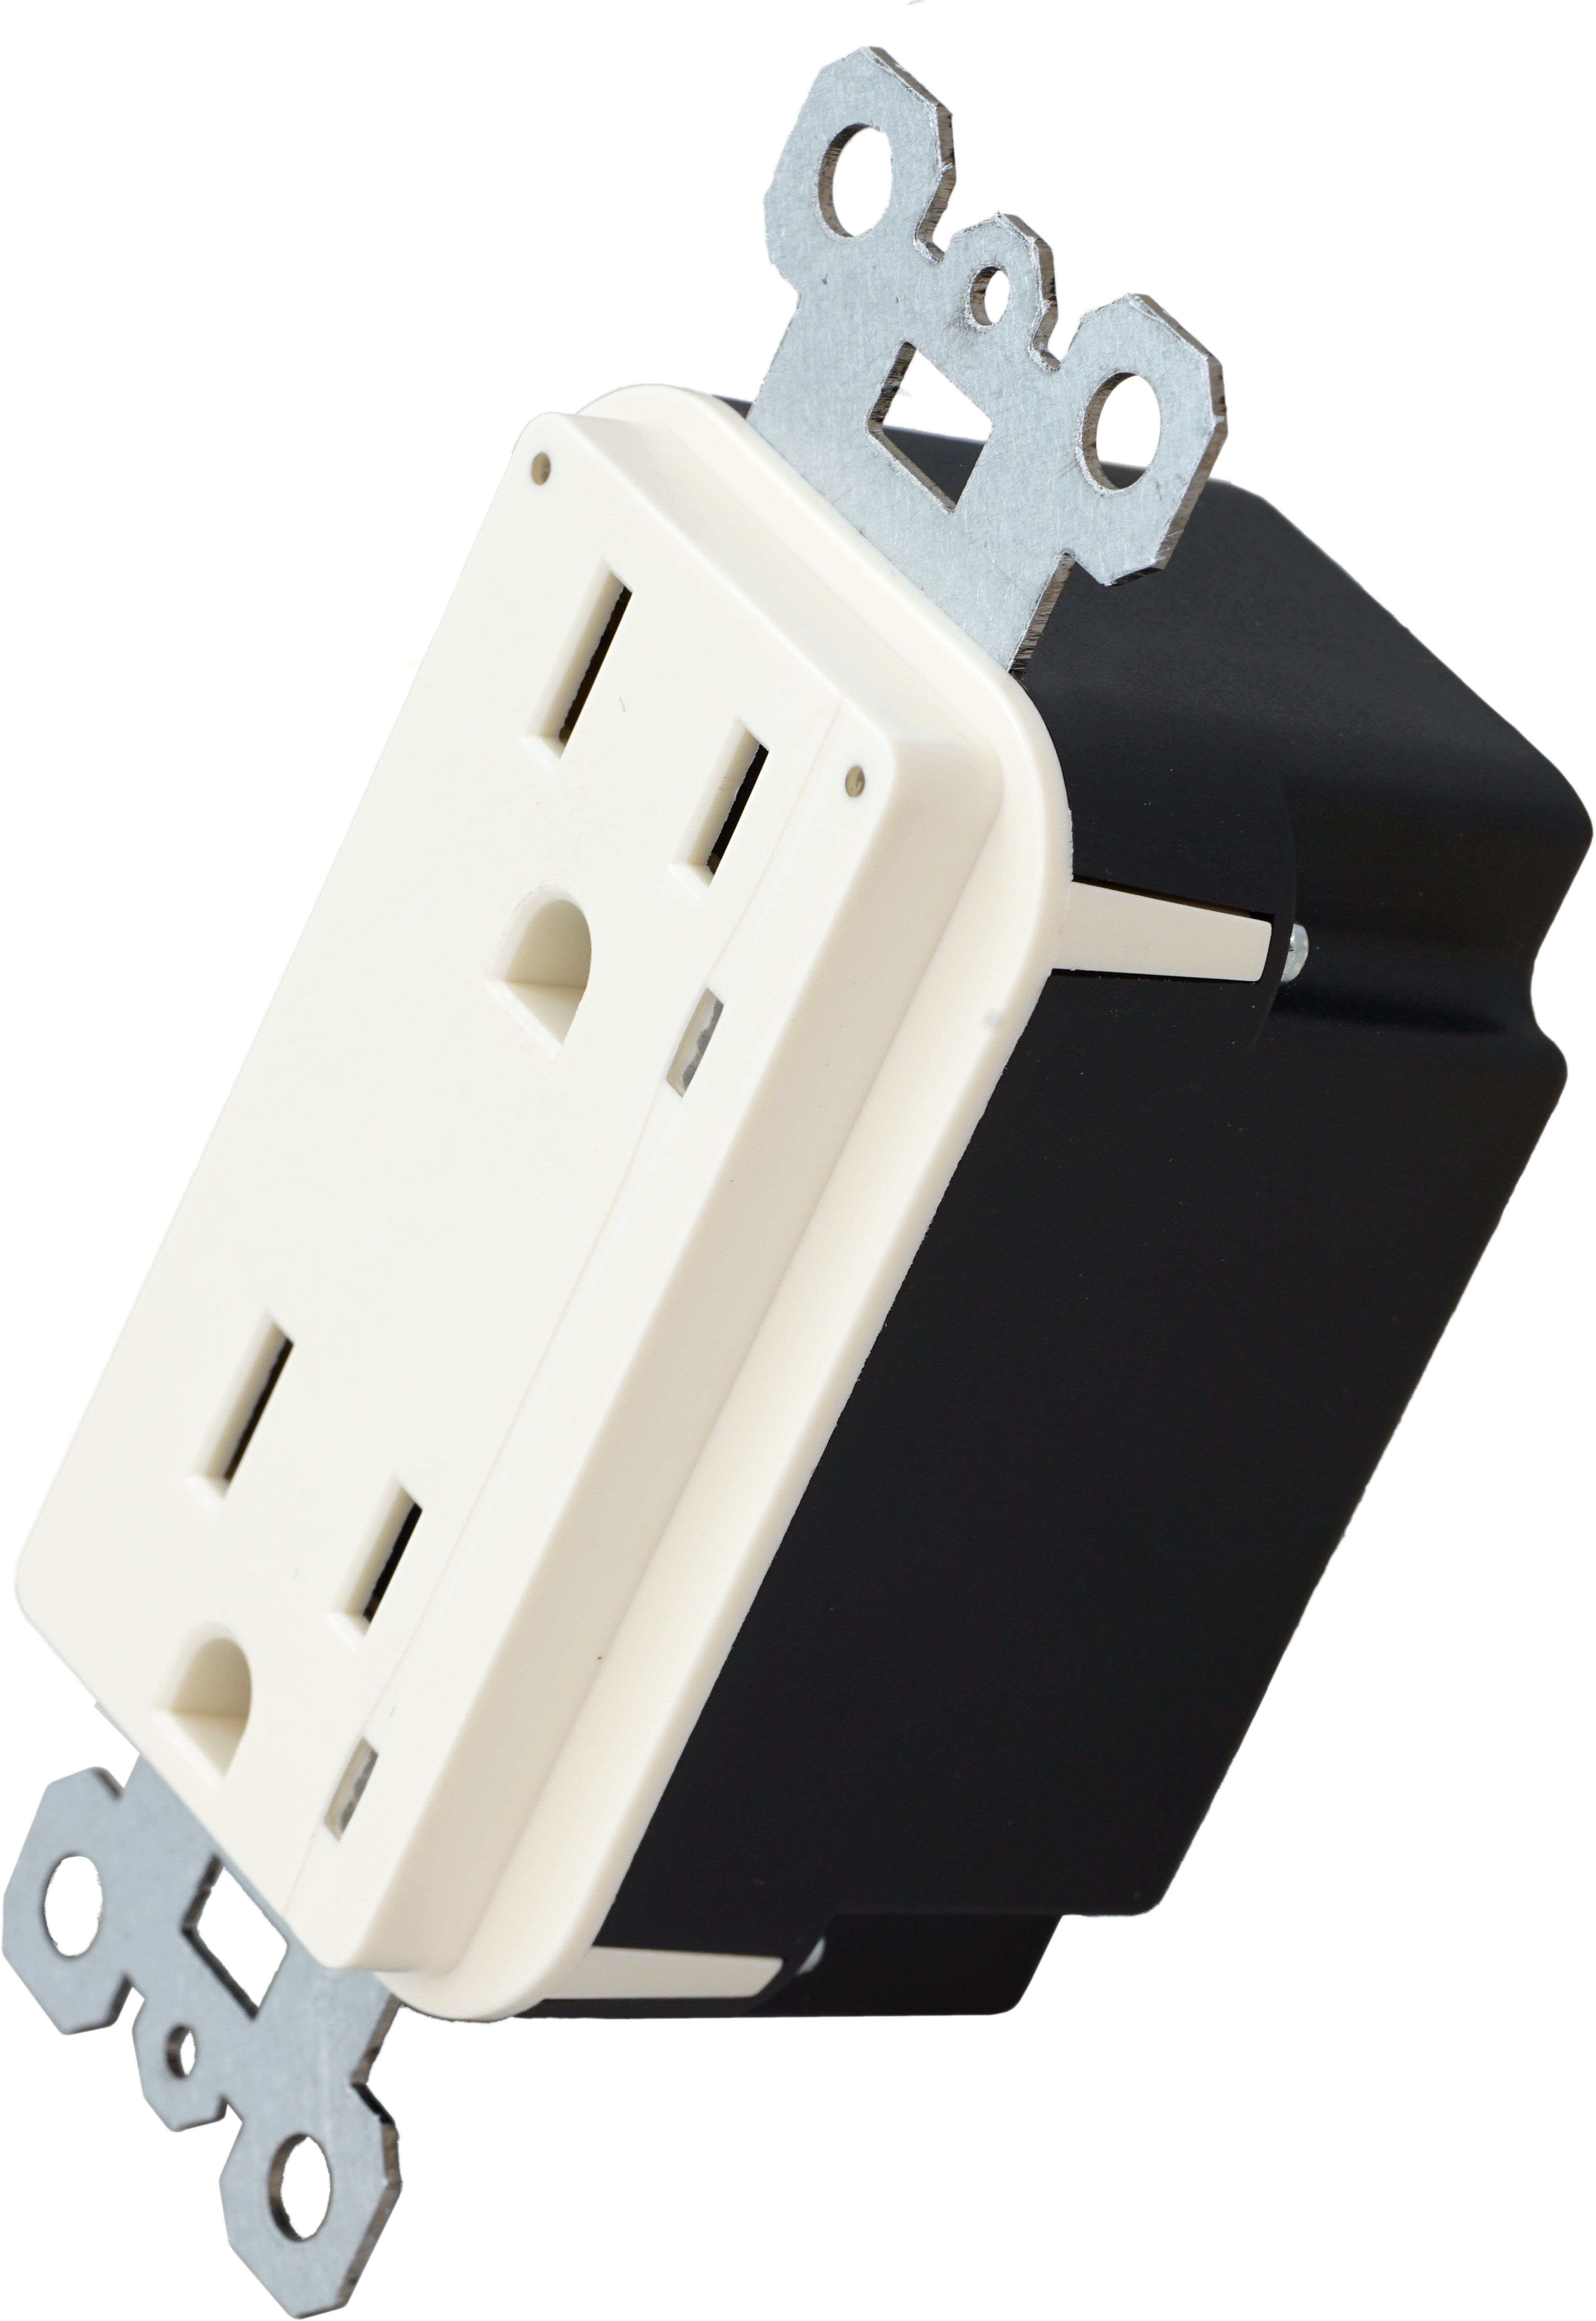 A Black And White Electrical Outlet